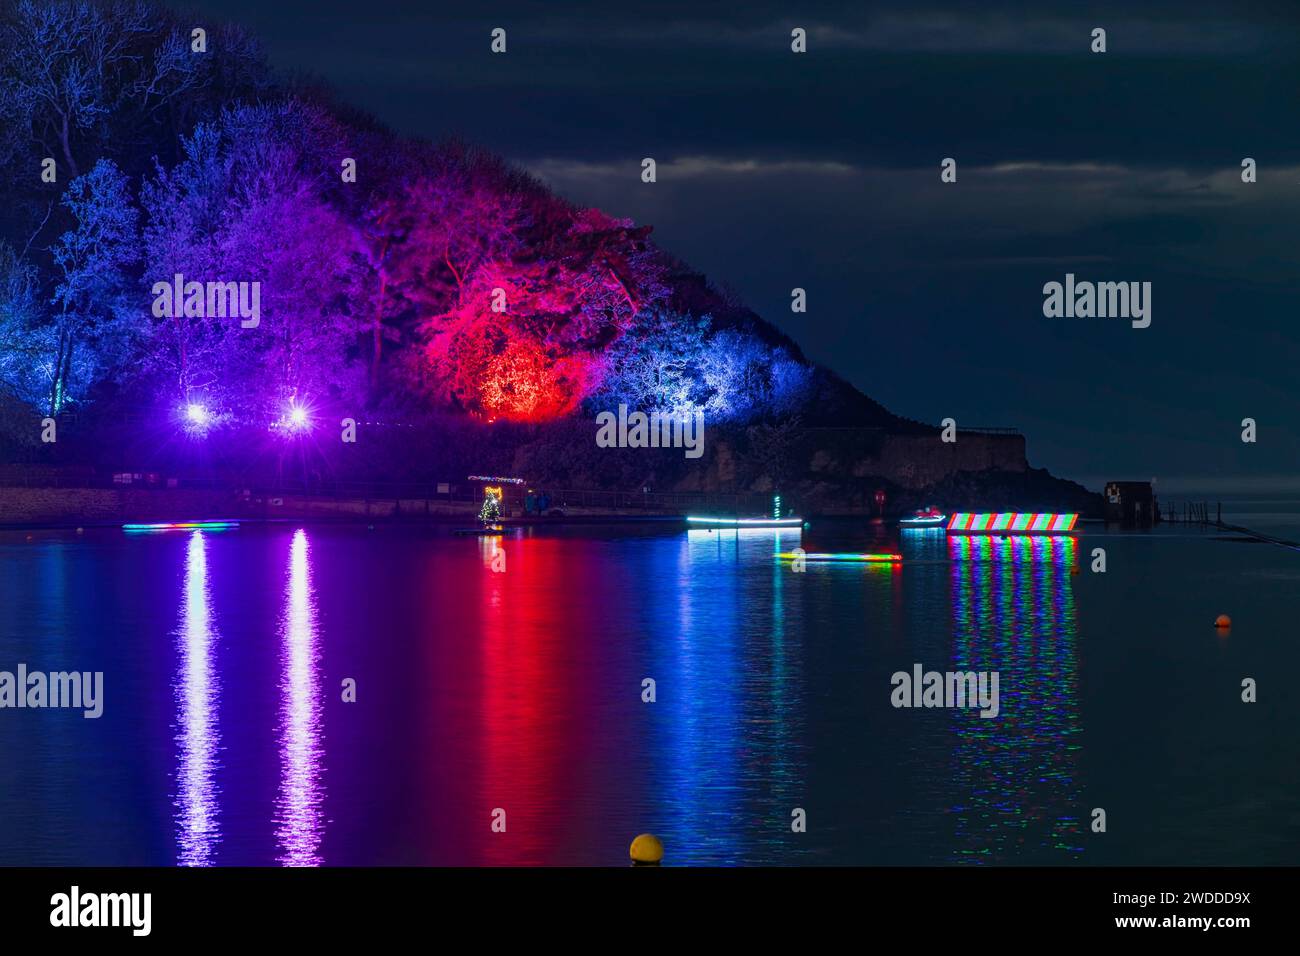 Boats with lights on on the marine lake Stock Photo